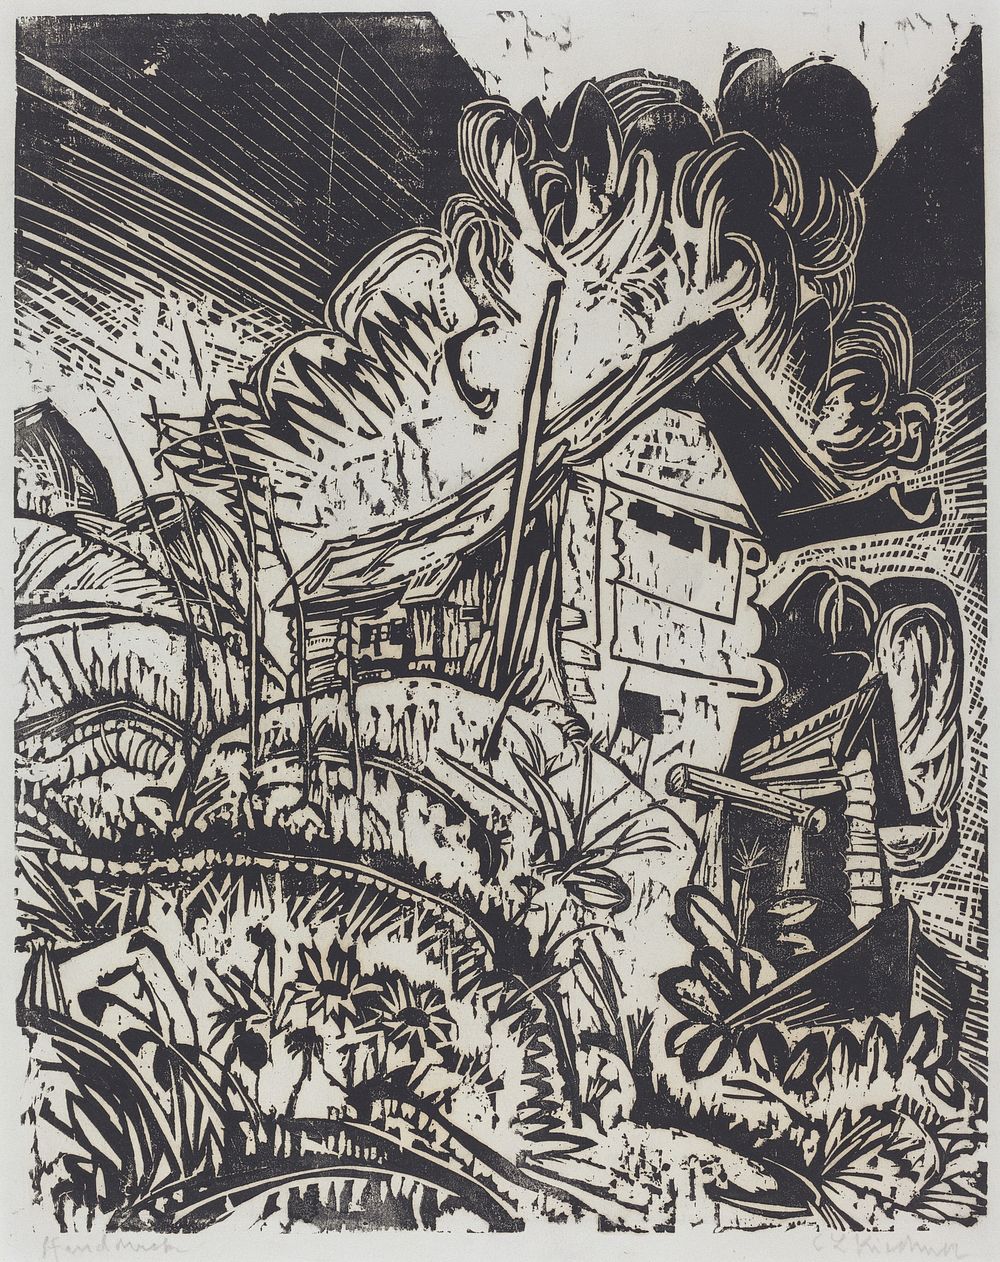 Mountain House (1917) print in high resolution by Ernst Ludwig Kirchner.  